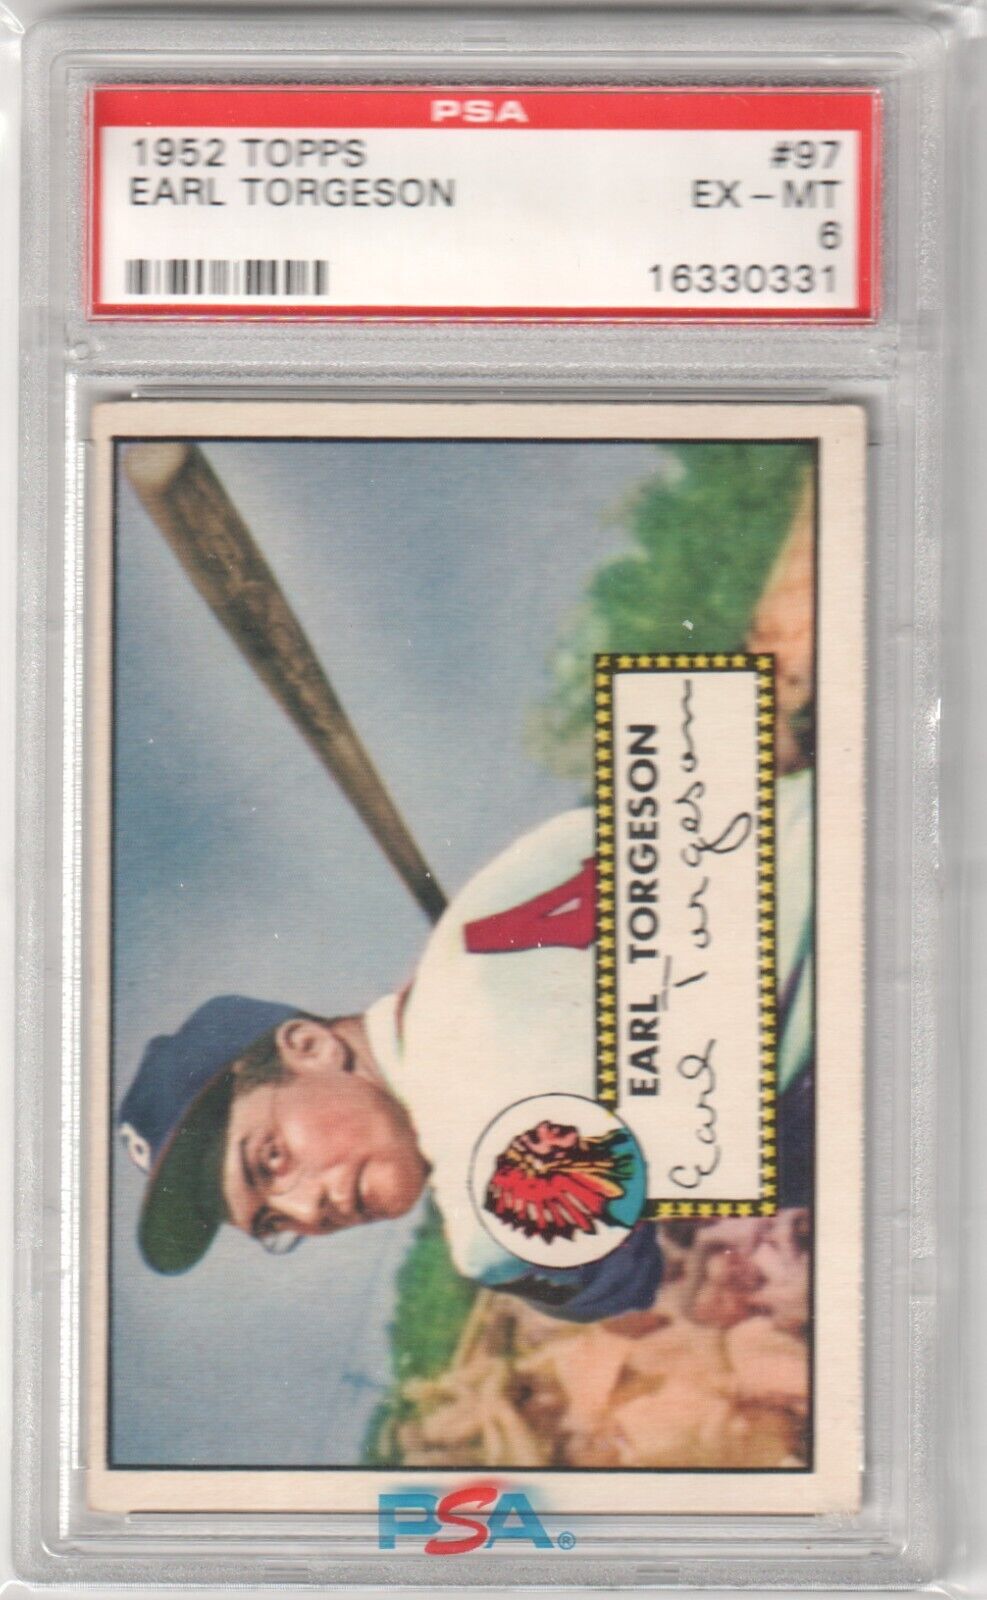 EARL TORGESON 1952 Topps #97 PSA 6 EX-MT - BRAVES